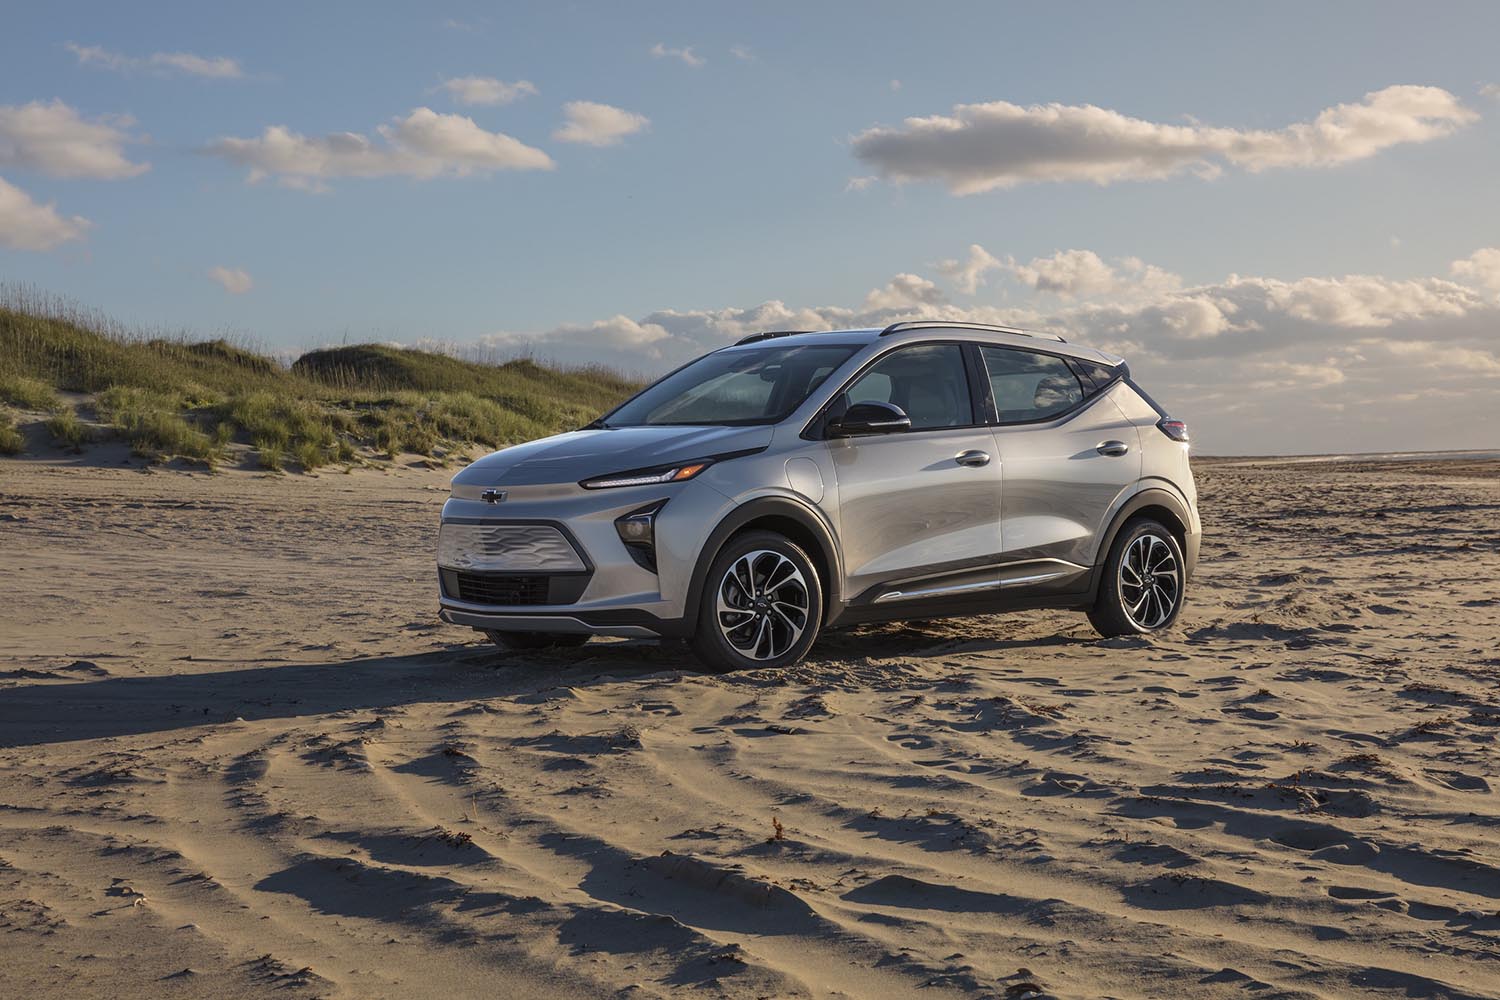 Chevrolet Bolt EUV in silver parked on a sandy beach